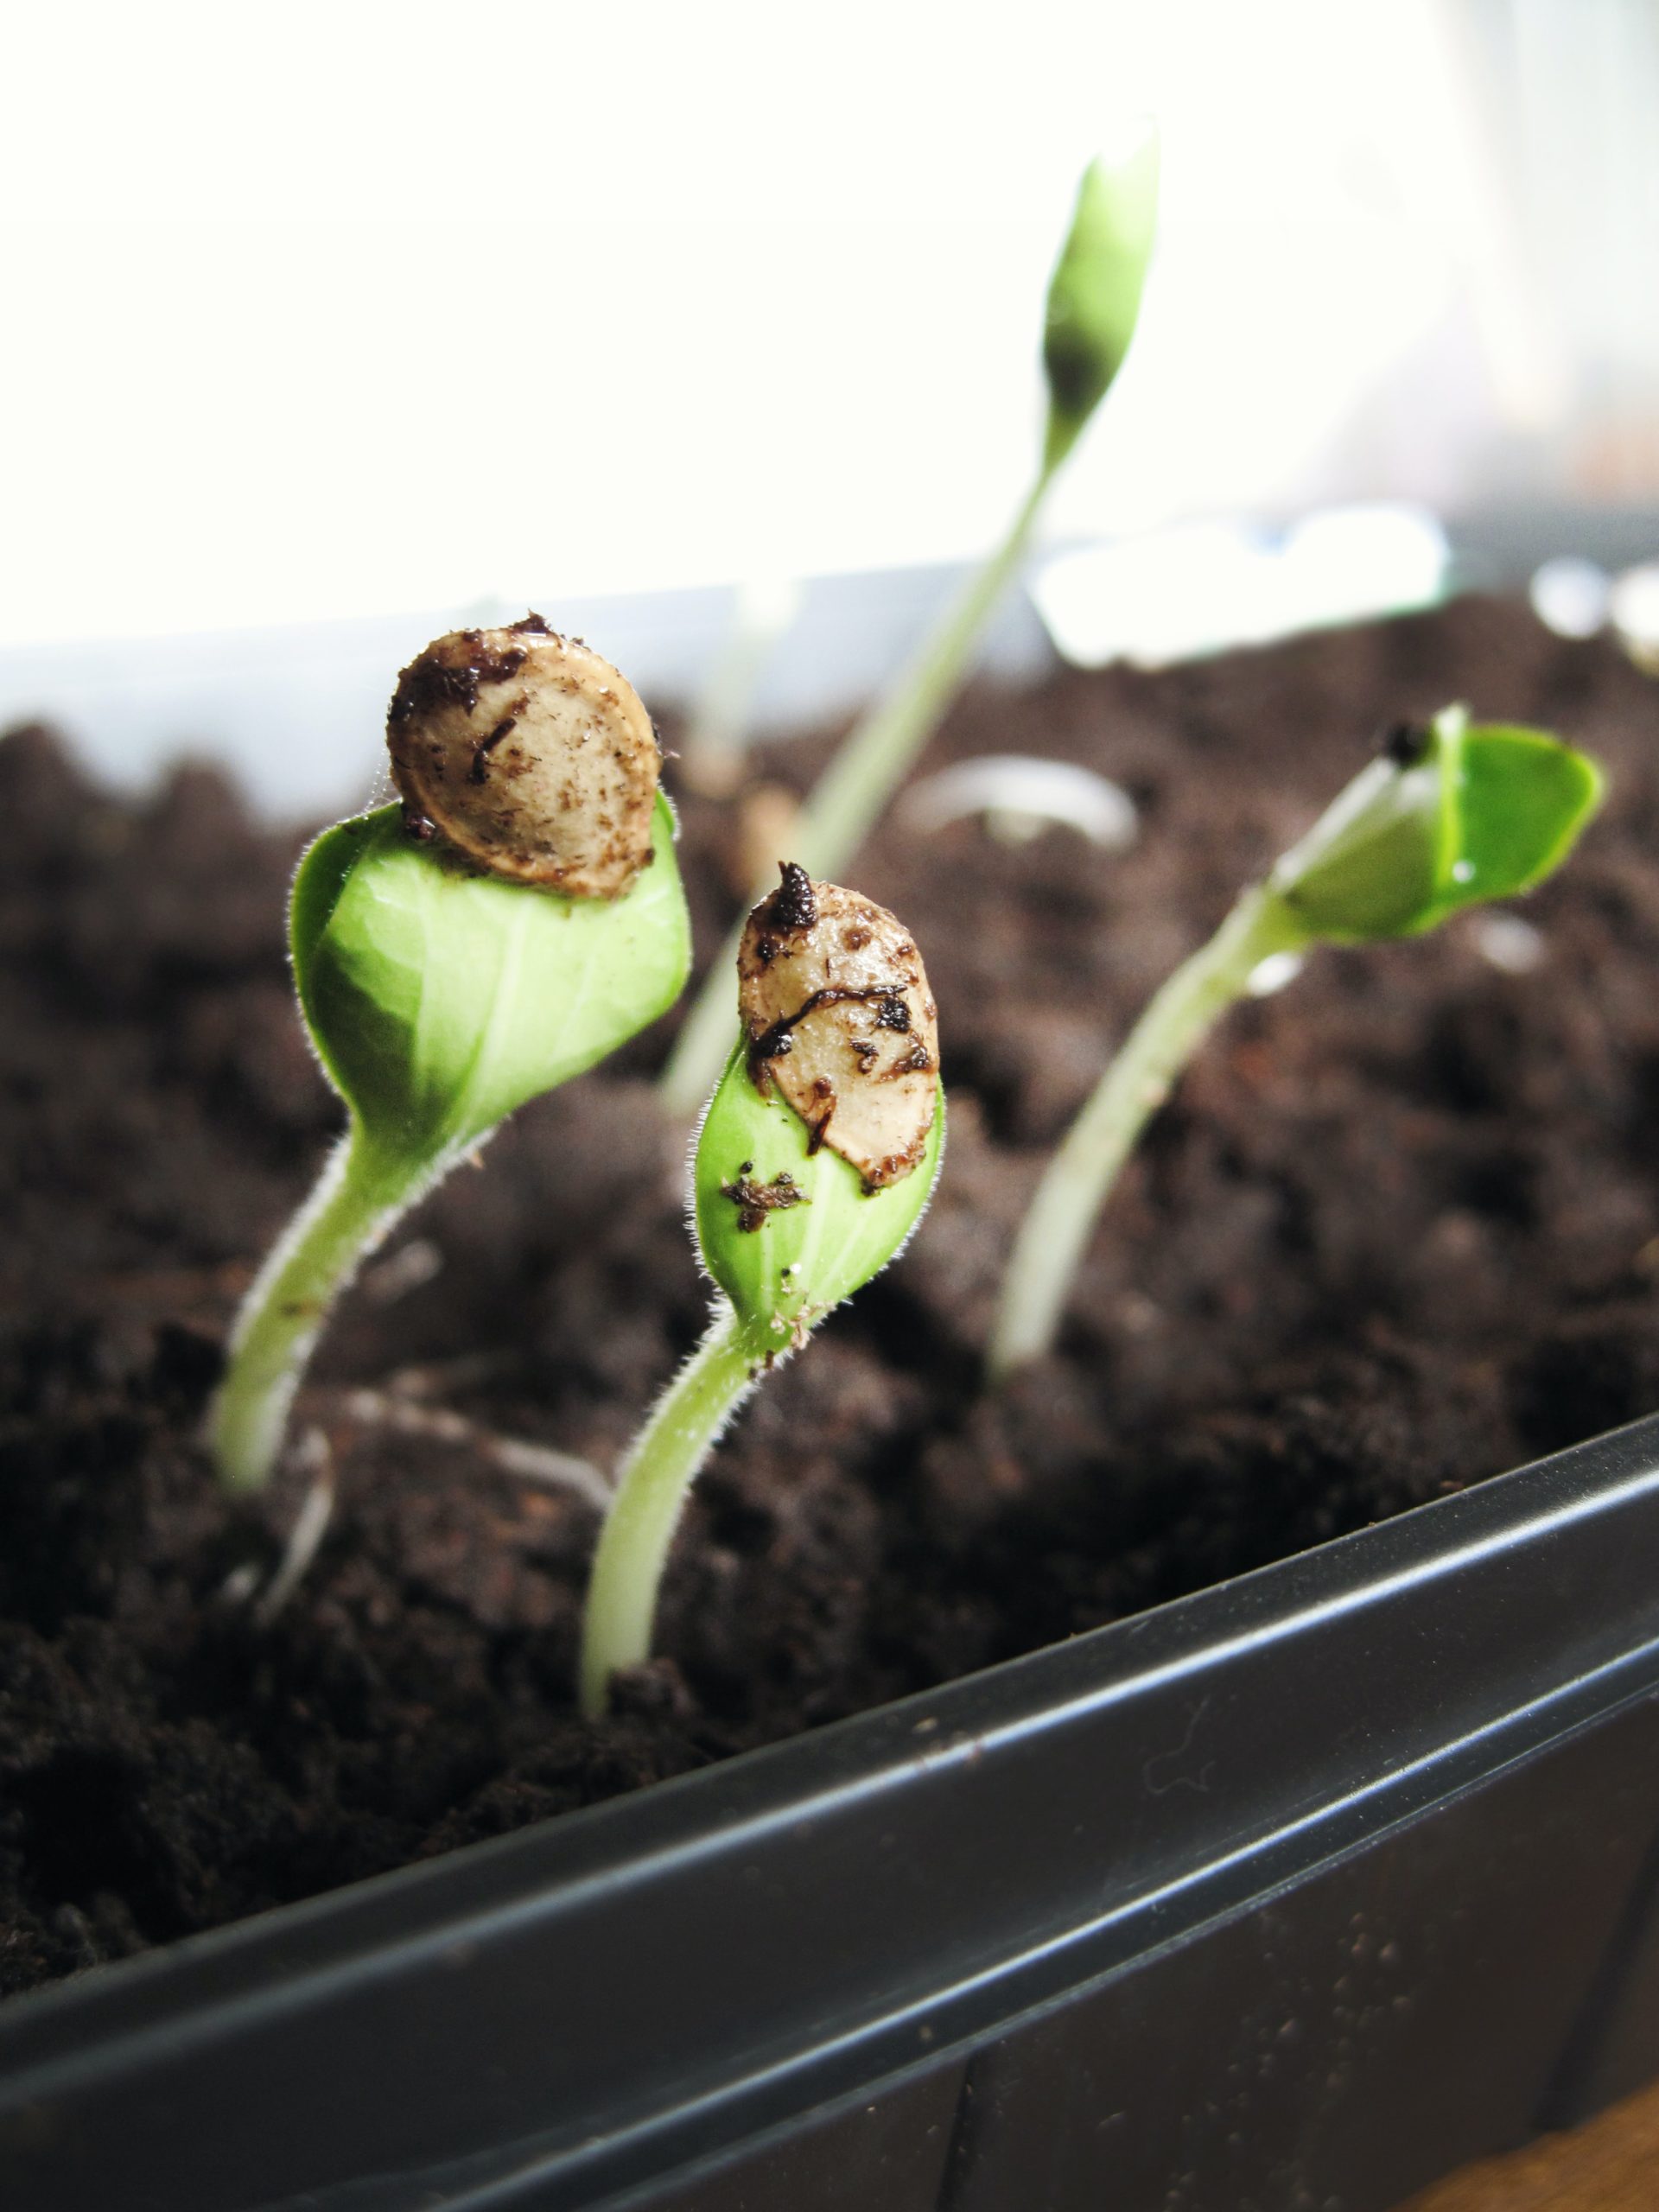 When should you start seeds indoors for spring?